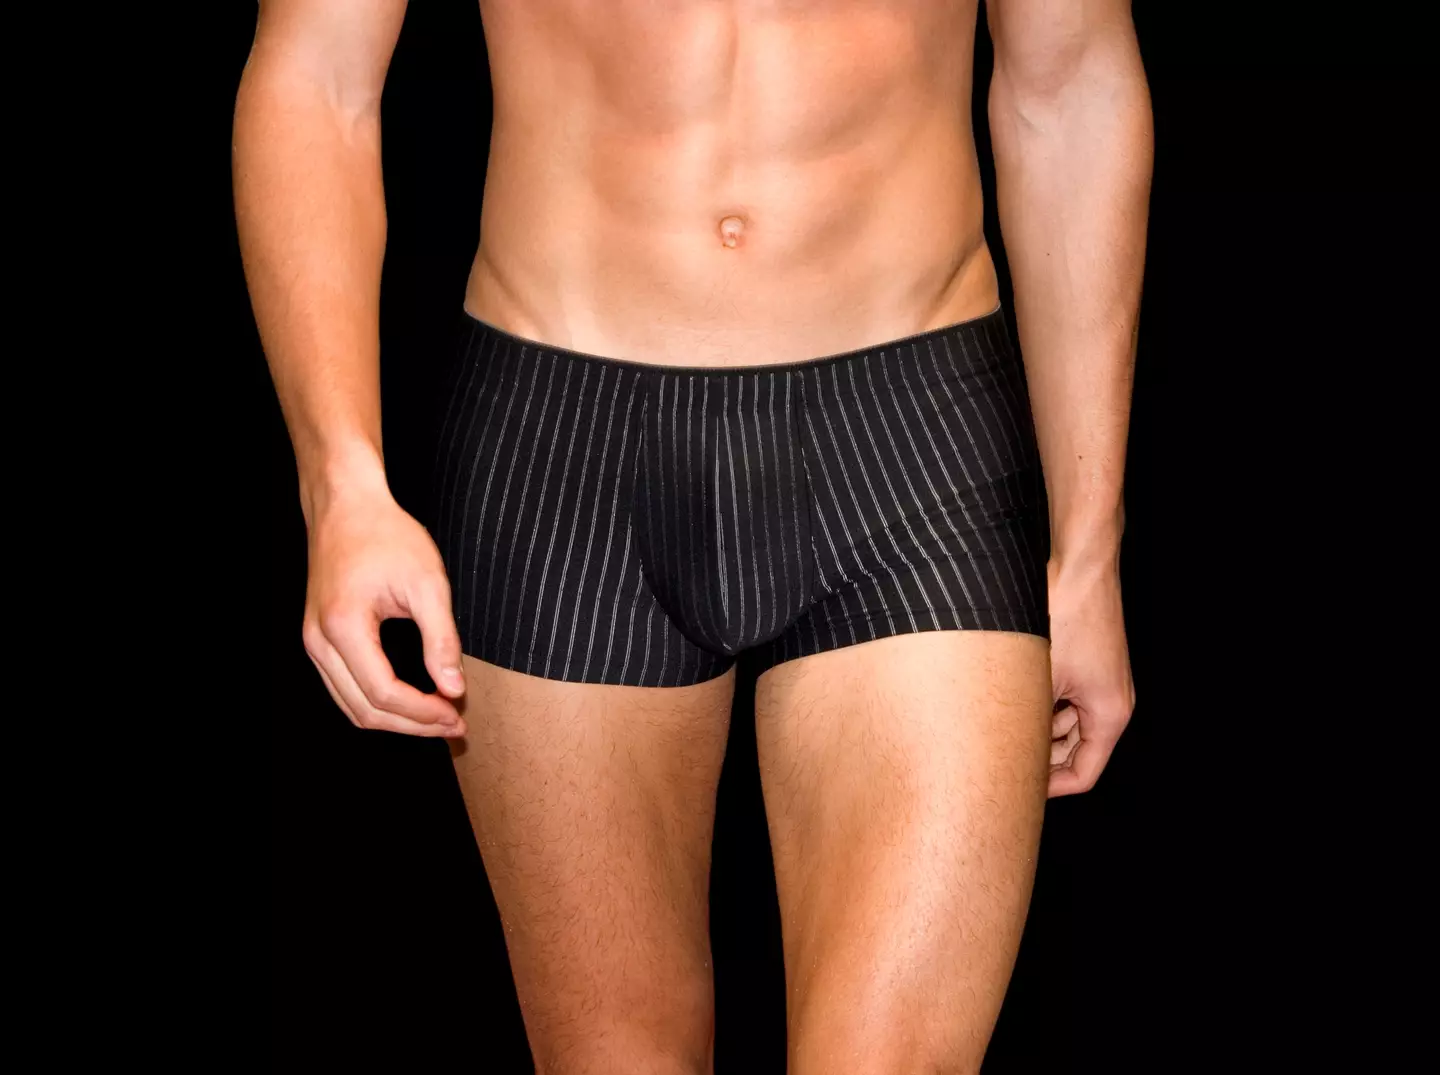 Boxers, briefs and bacterial vaginosis: how your underwear can